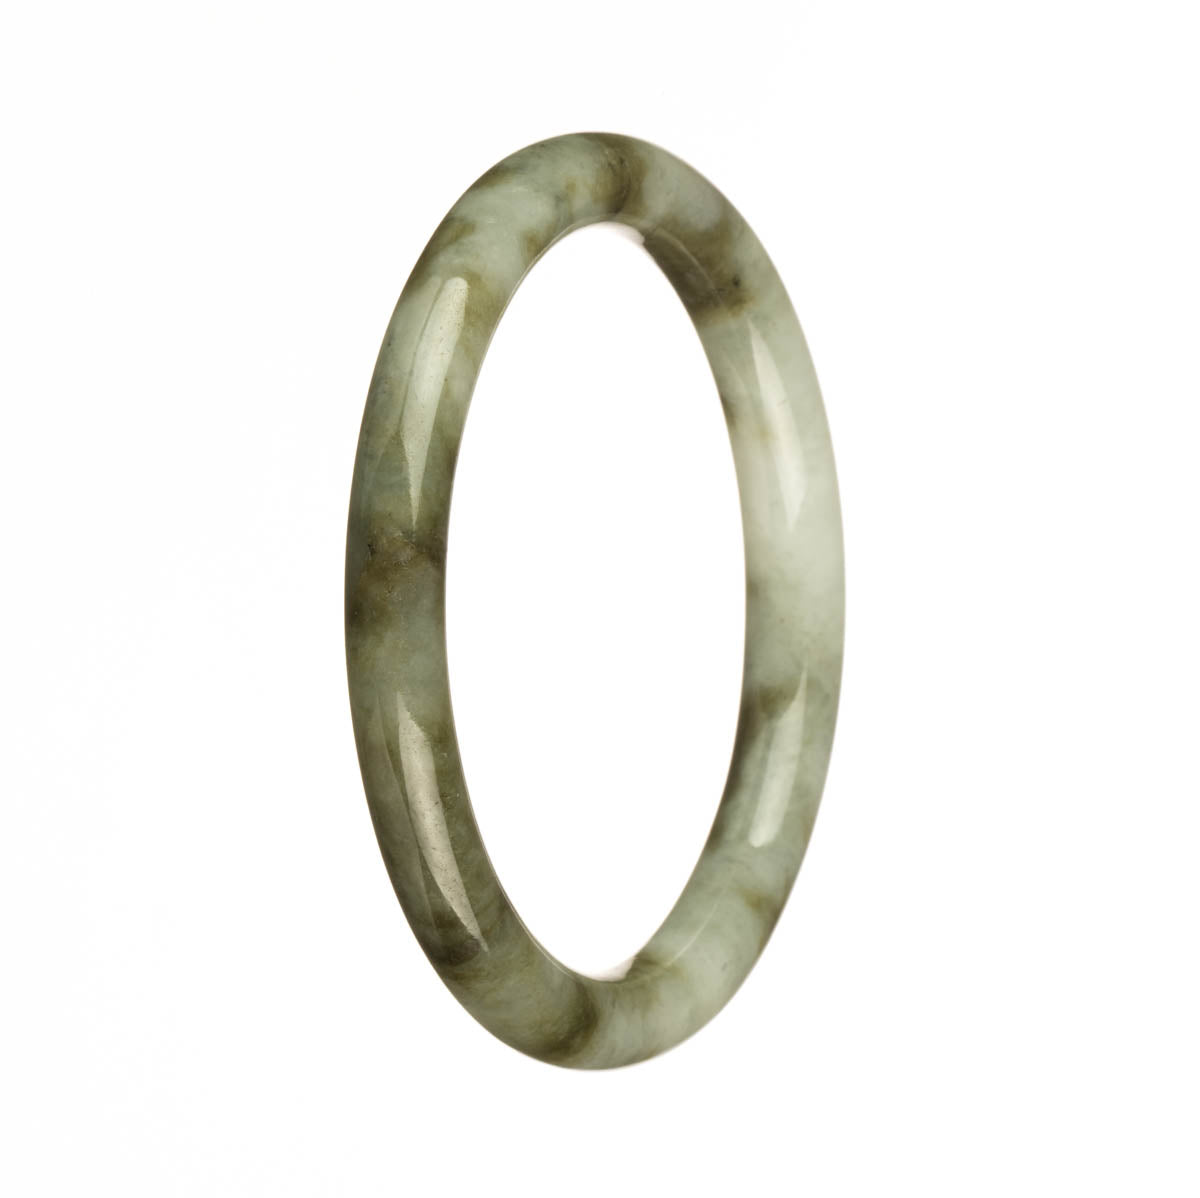 A close-up image of a petite round jadeite bangle with a white base color and intricate olive green patterns.